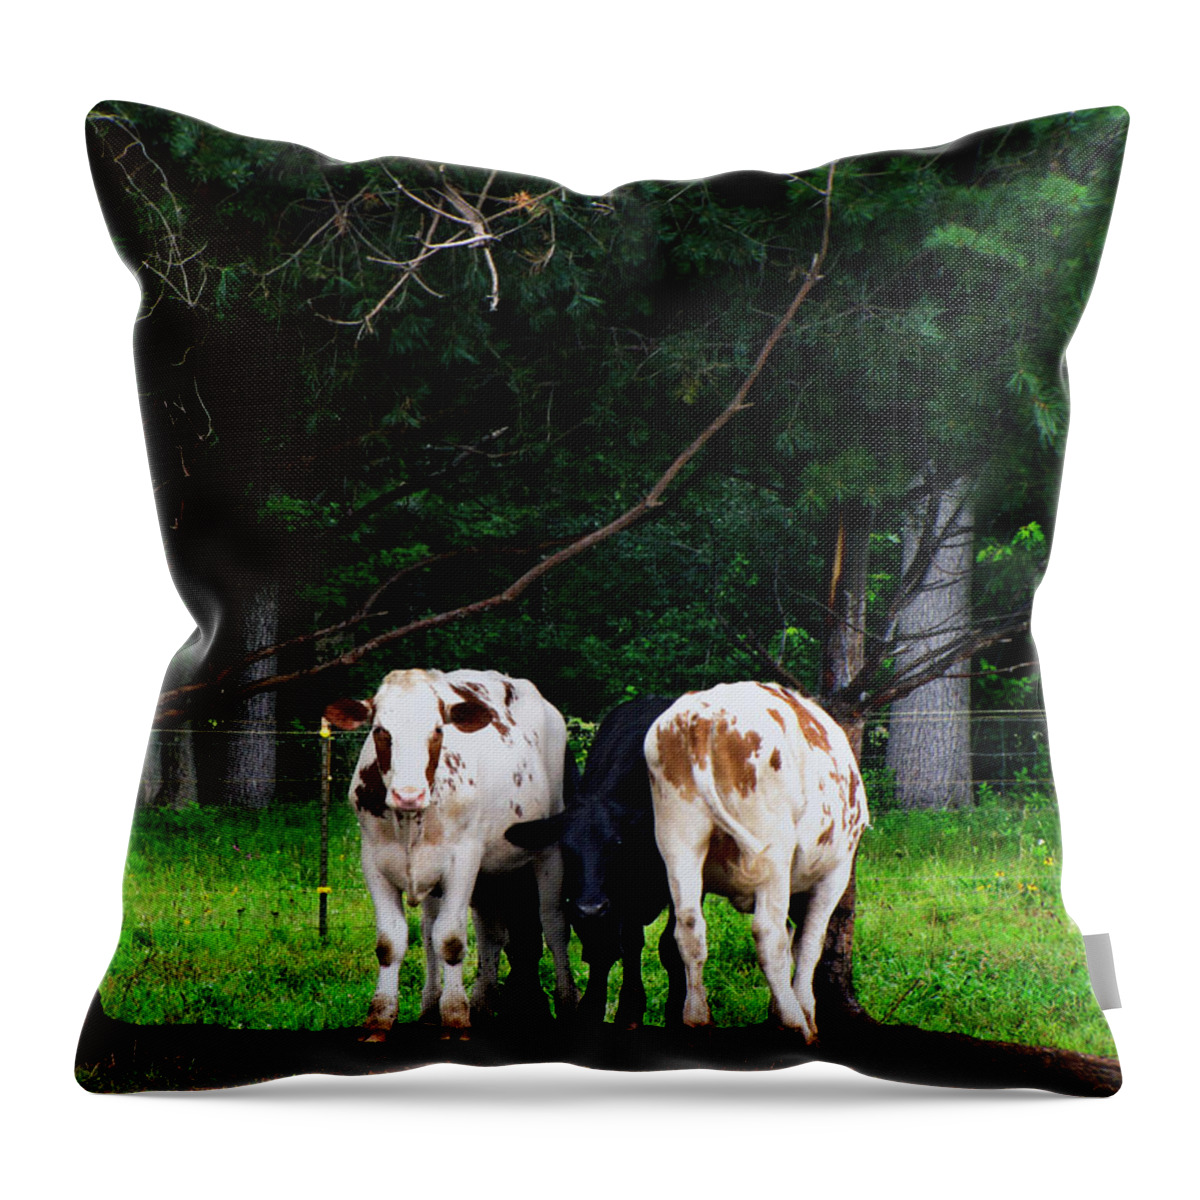 Animals Throw Pillow featuring the photograph Farm Cattle by Ms Judi